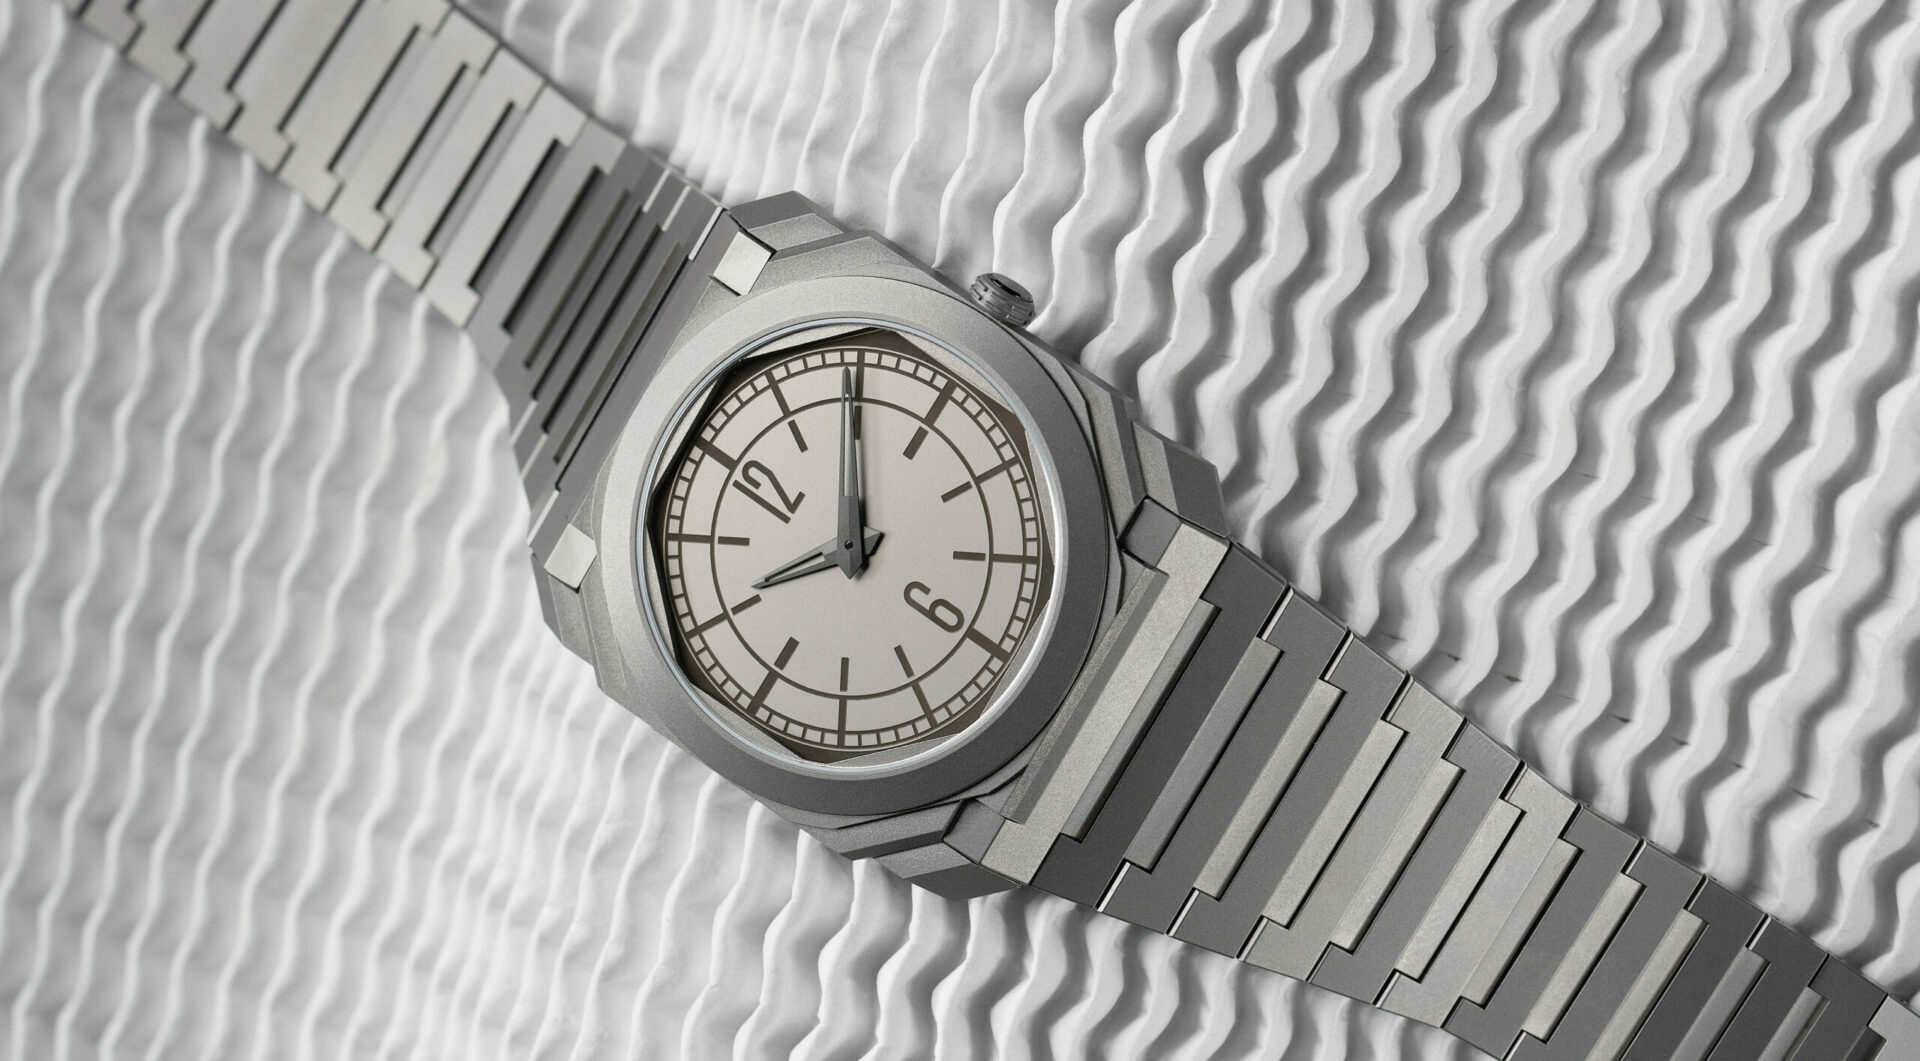 Phillips adds a sector touch to their limited-edition Bulgari Octo Finissimo